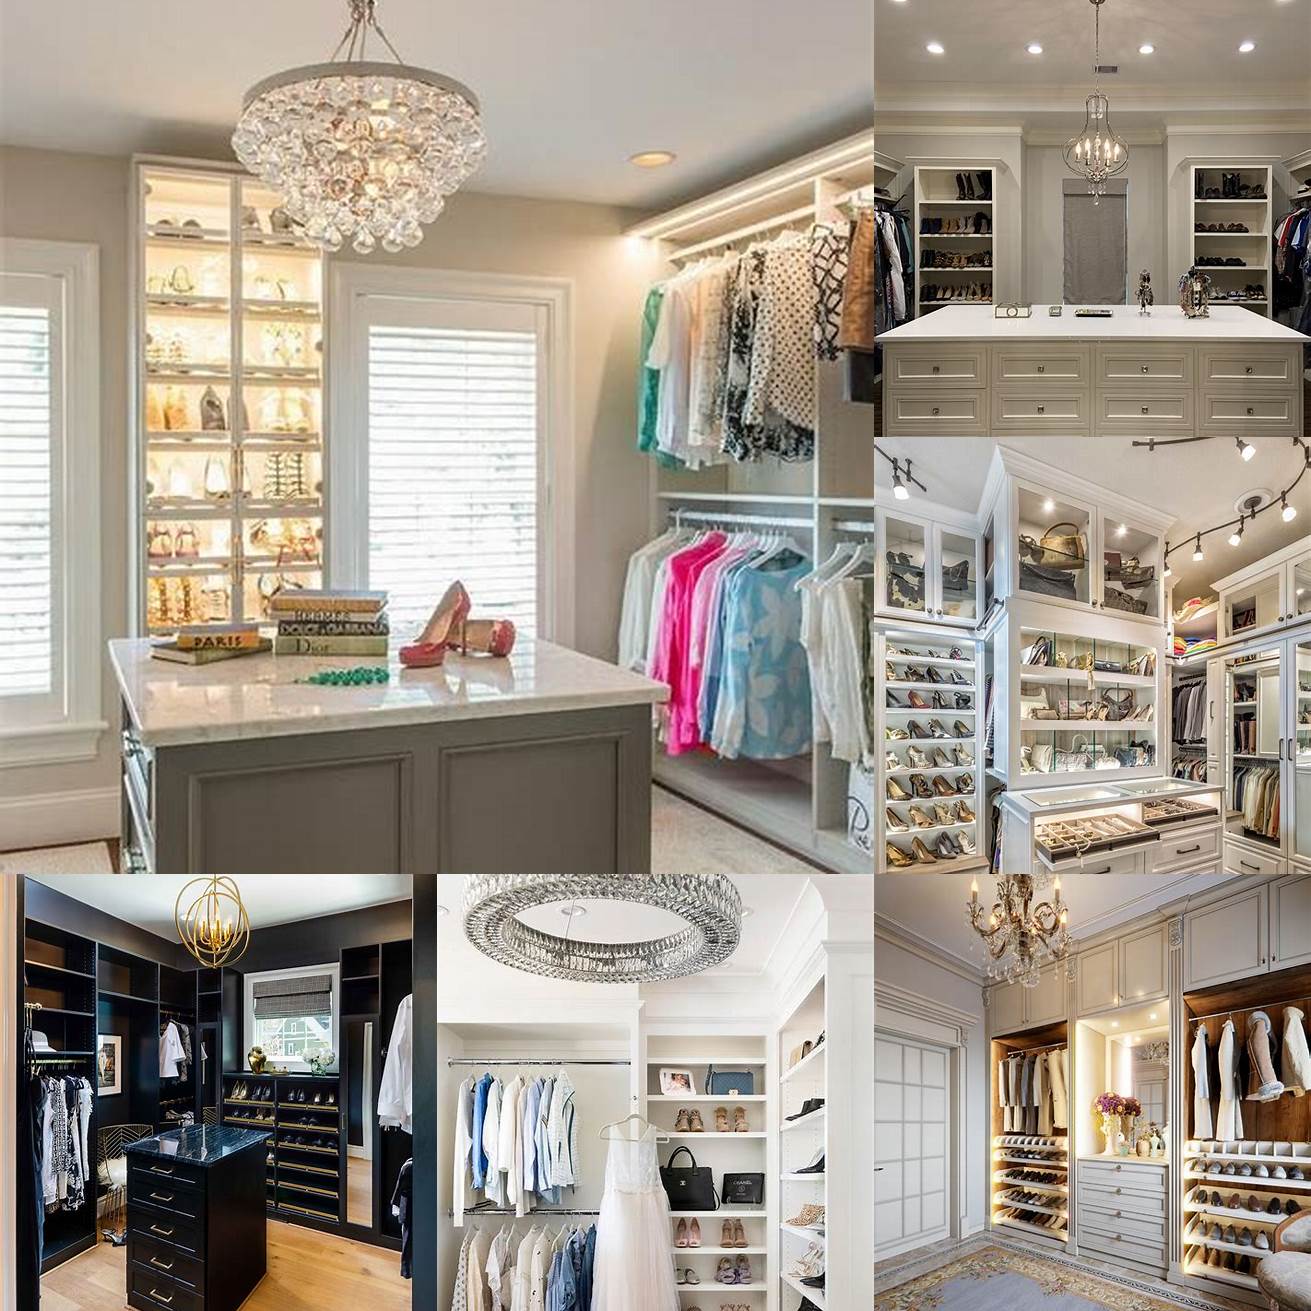 Image of a walk-in closet with a chandelier